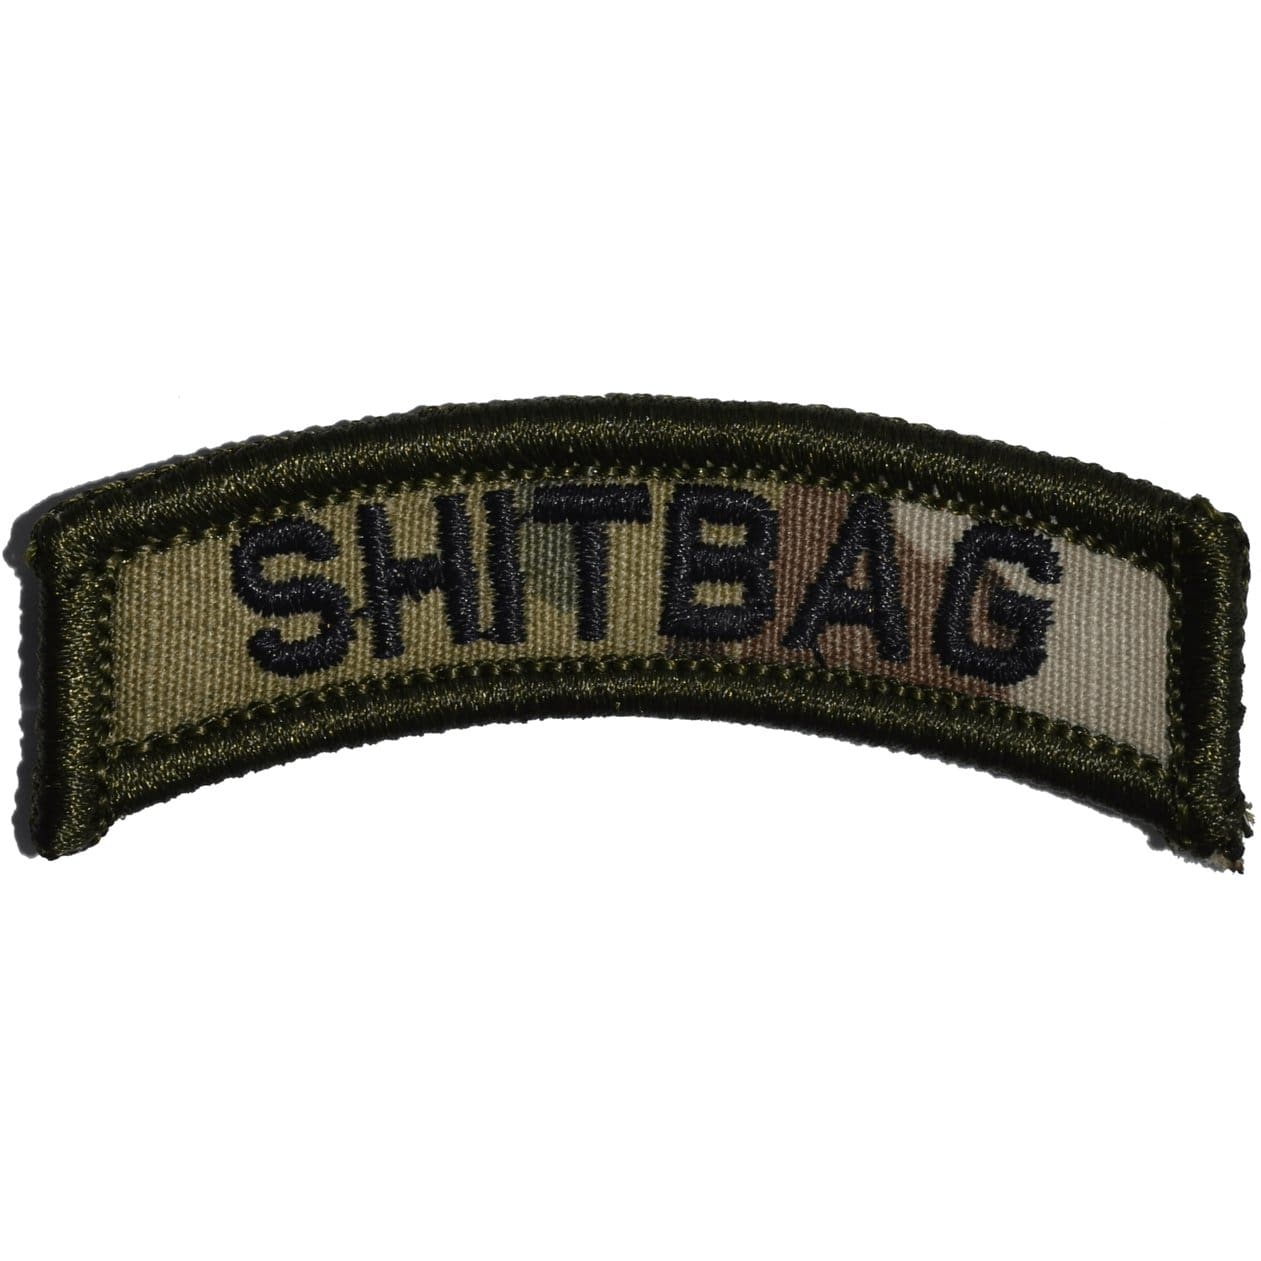 Tactical Gear Junkie Patches MultiCam Shitbag Tab Patch